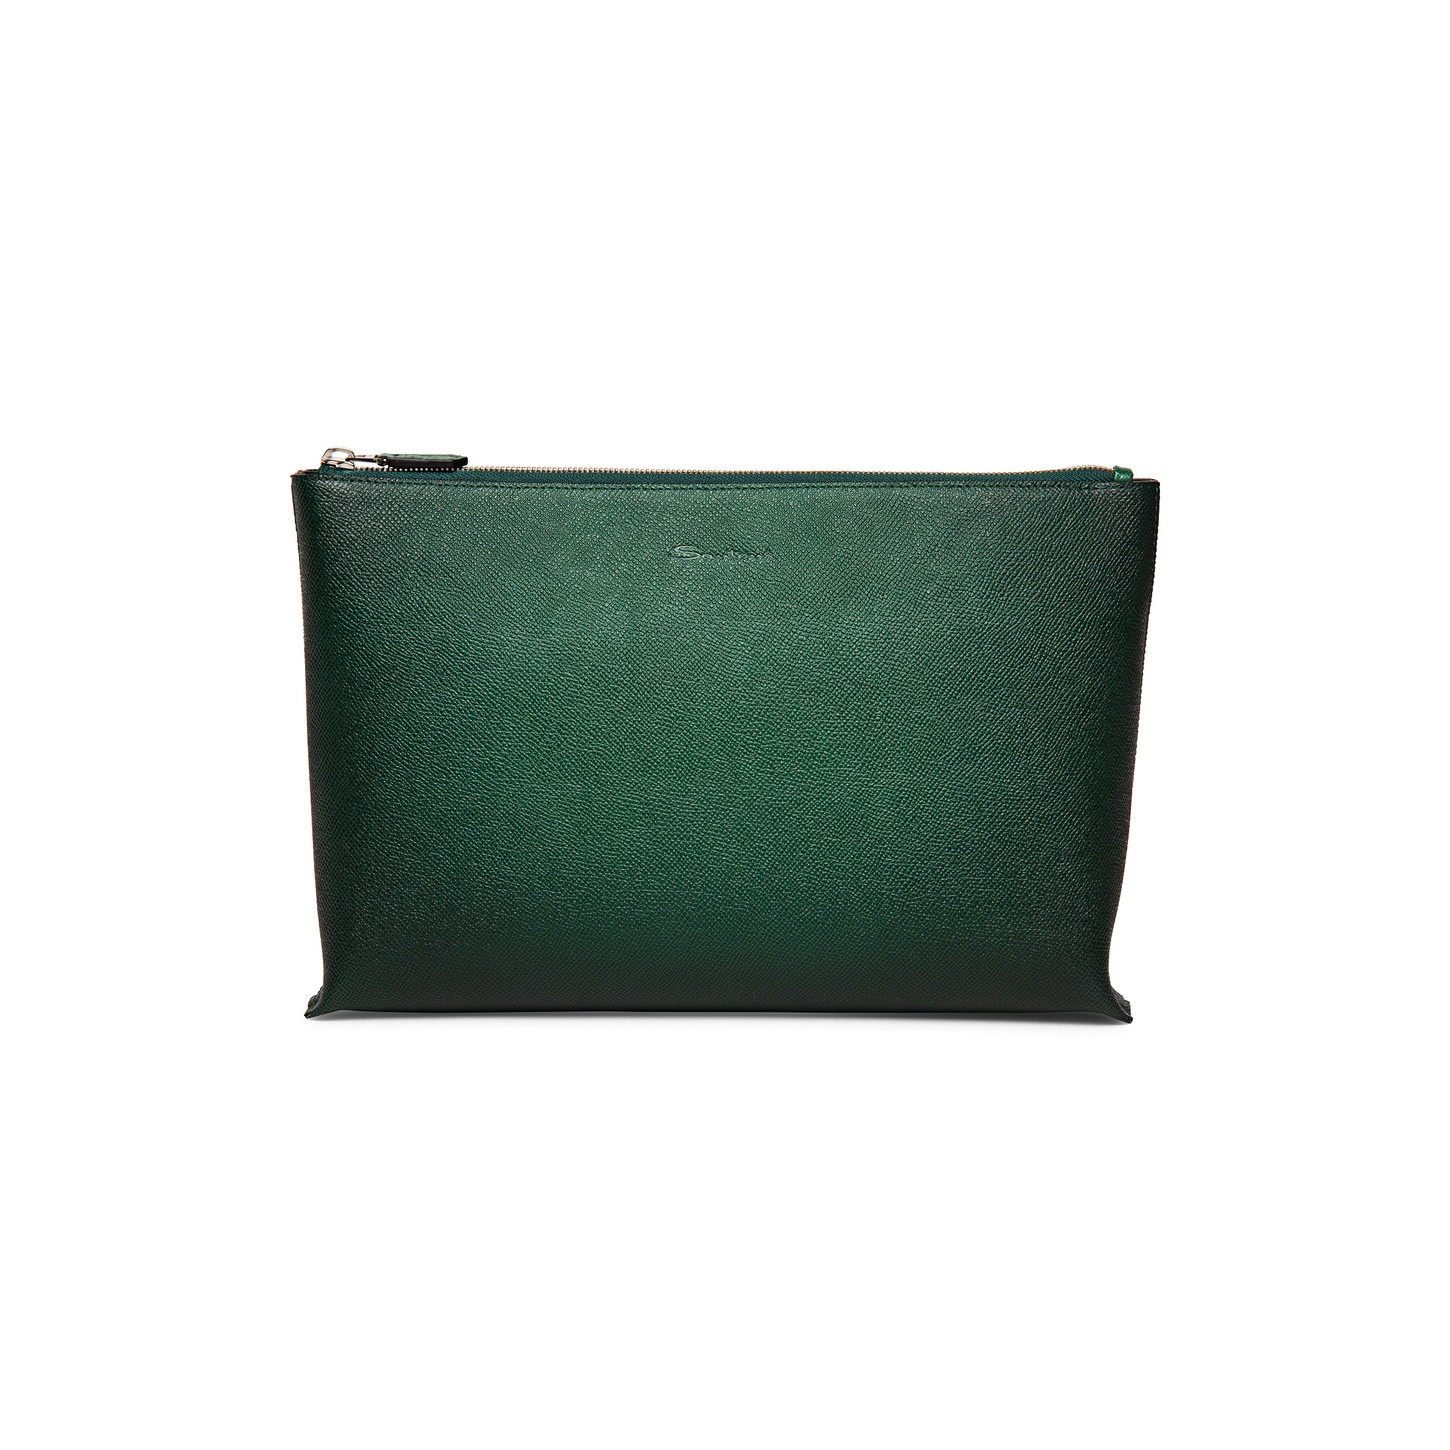 Green saffiano leather pouch - 1